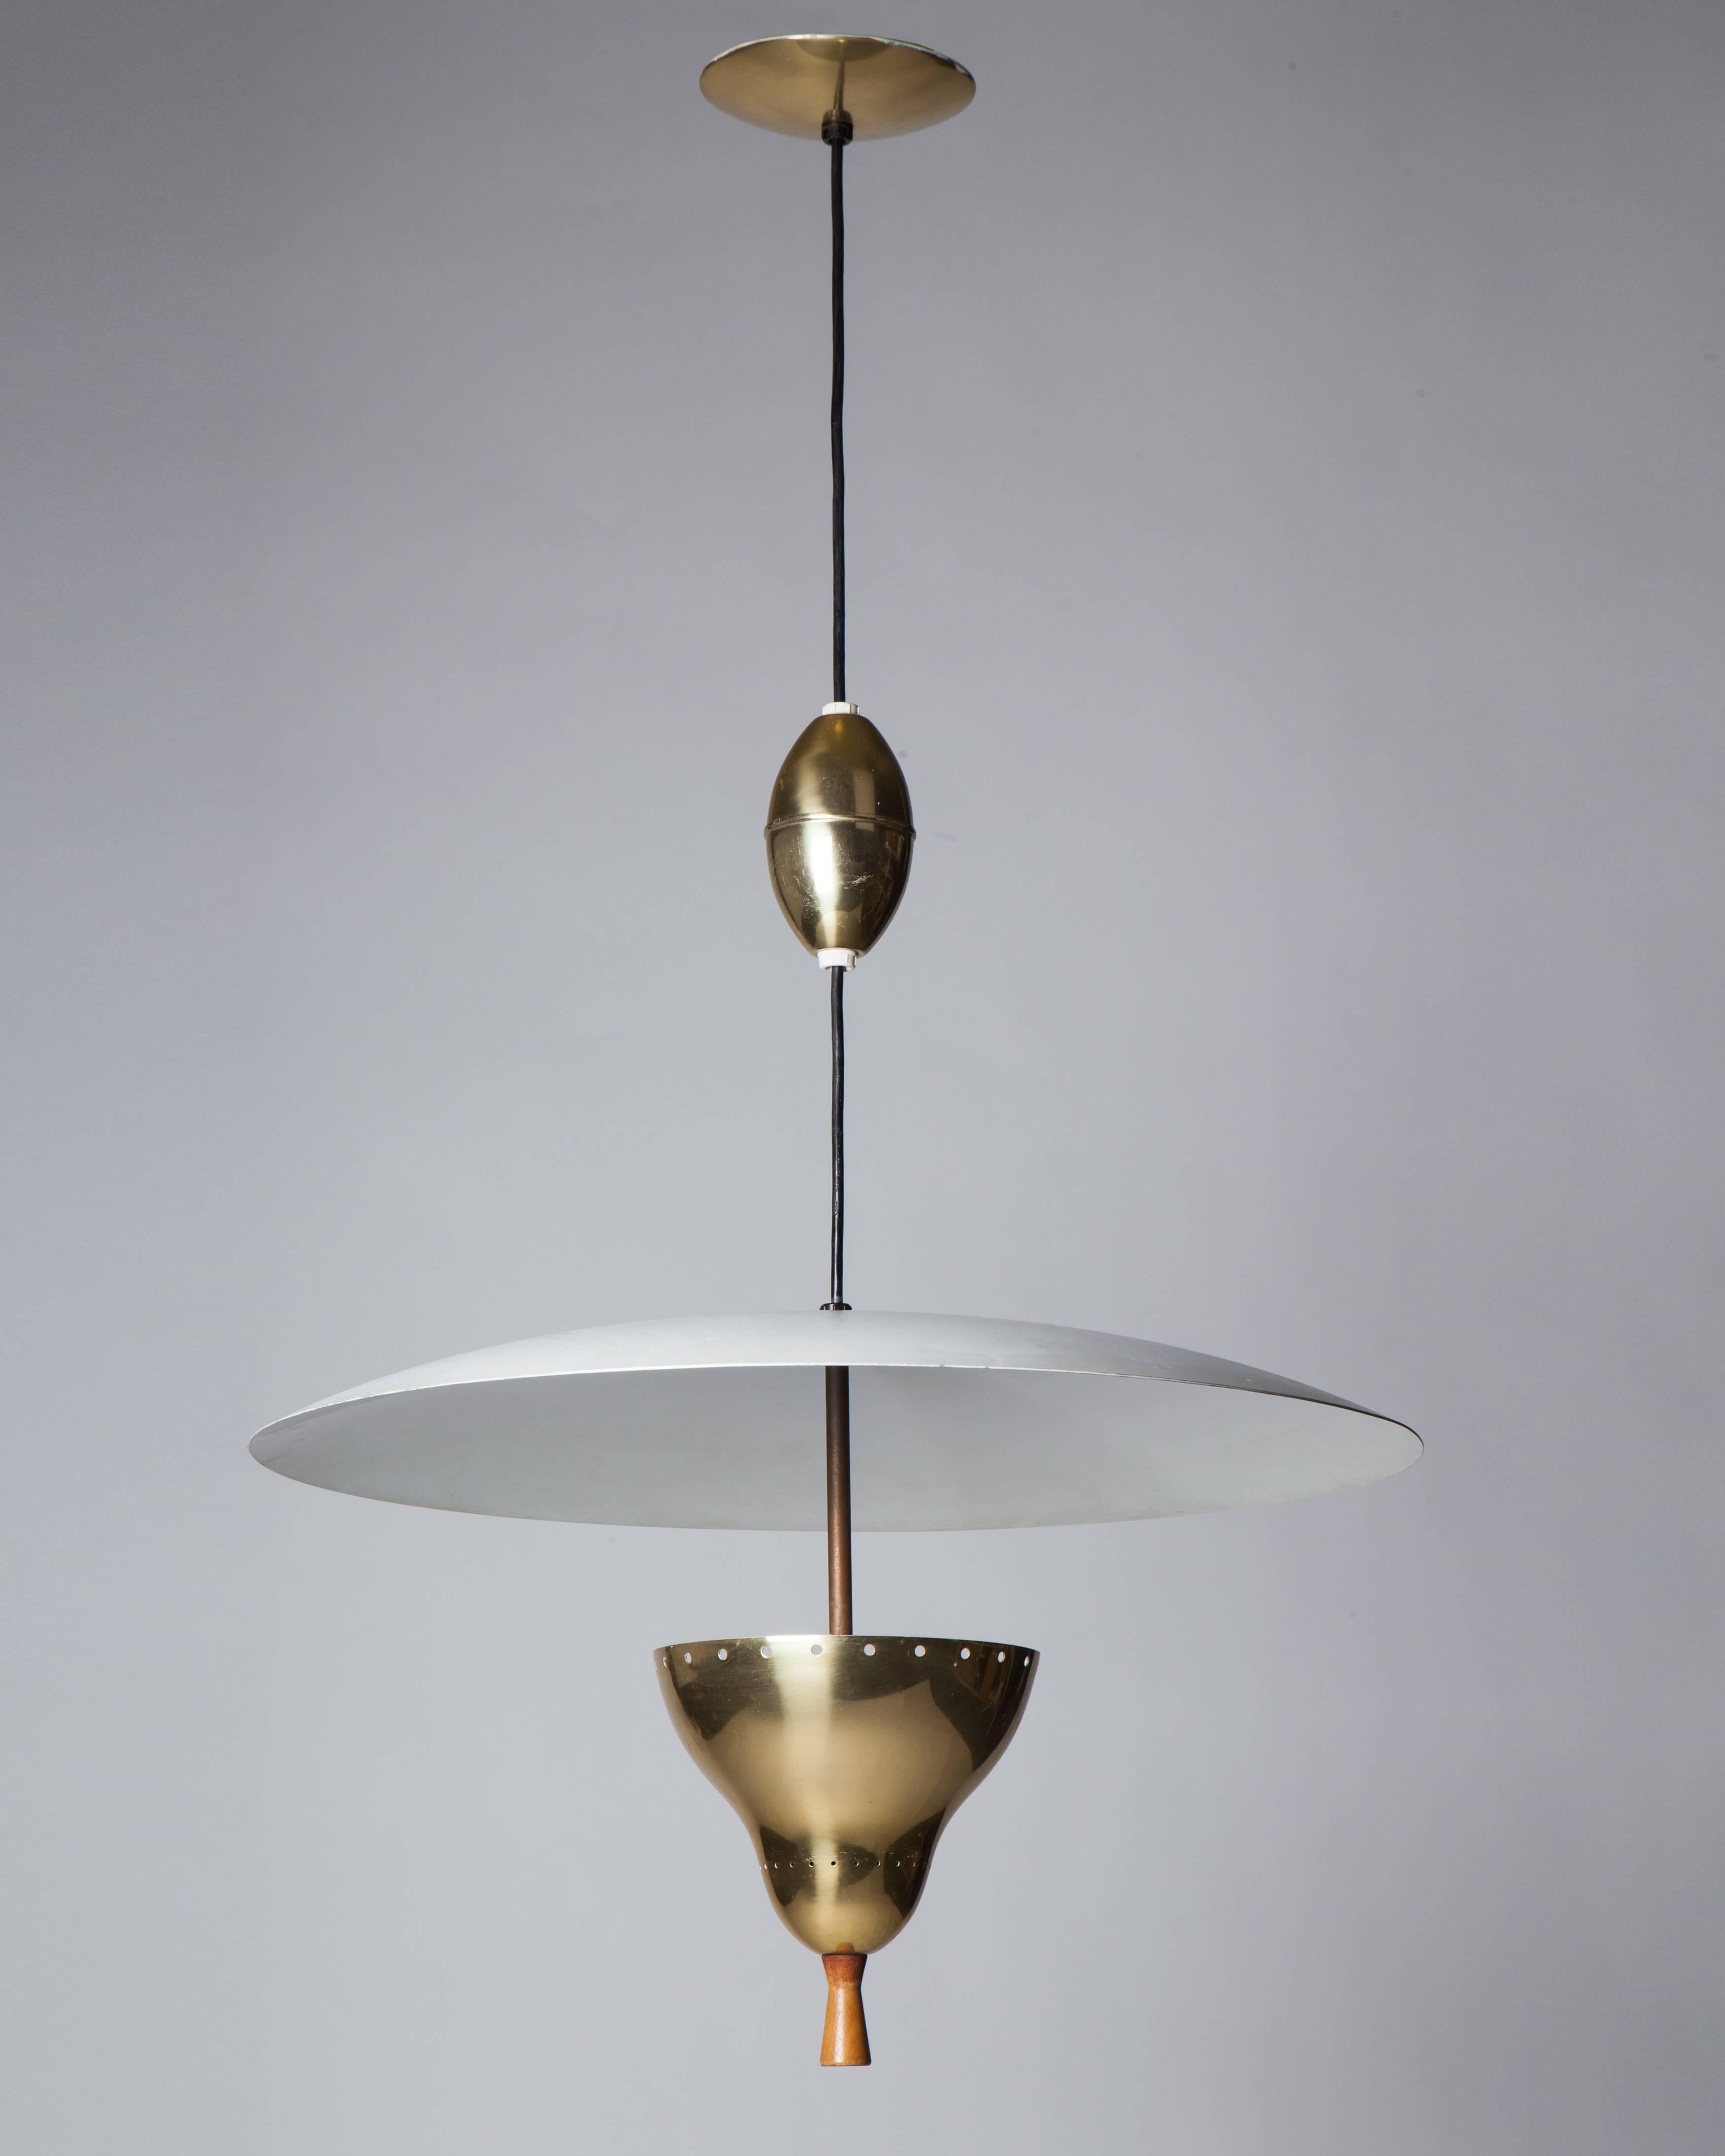 AHL3966
An anodized aluminum, brass and wood spring-loaded pulley light with a large disc shade in its original enameled white finish. The height of fixture can be extended up to an extra 24